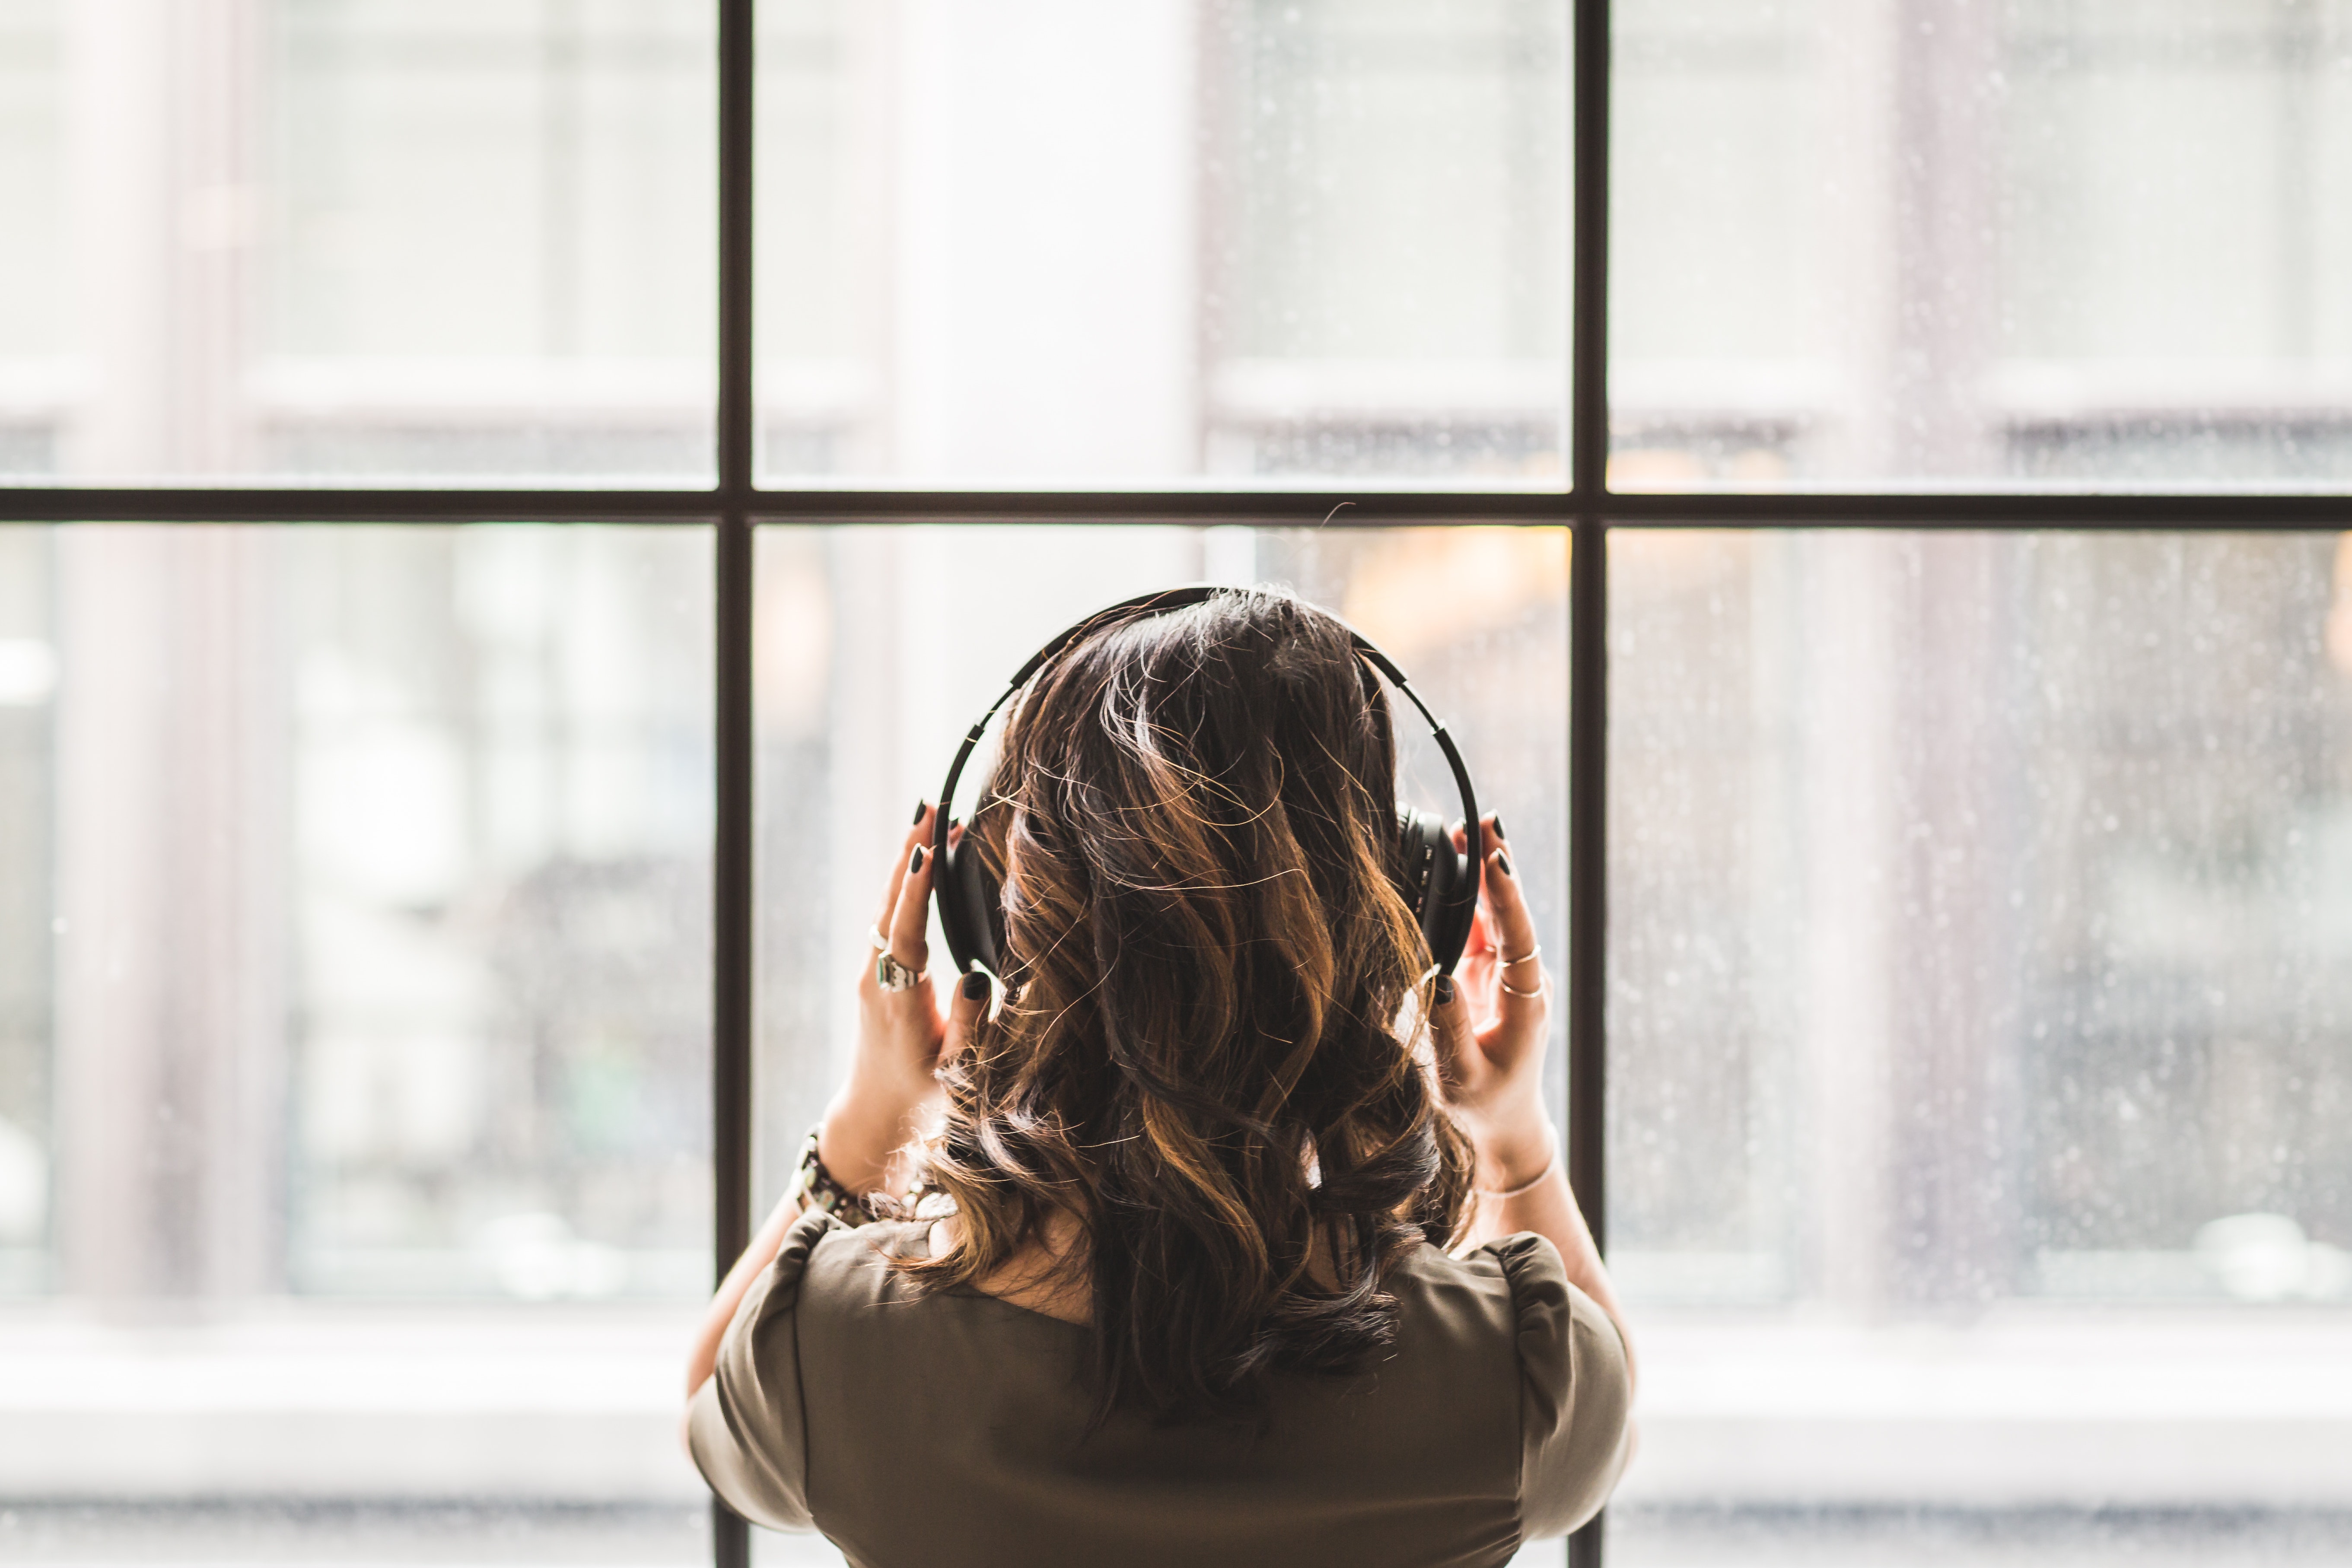 The Best Podcasts for Writers in 2020